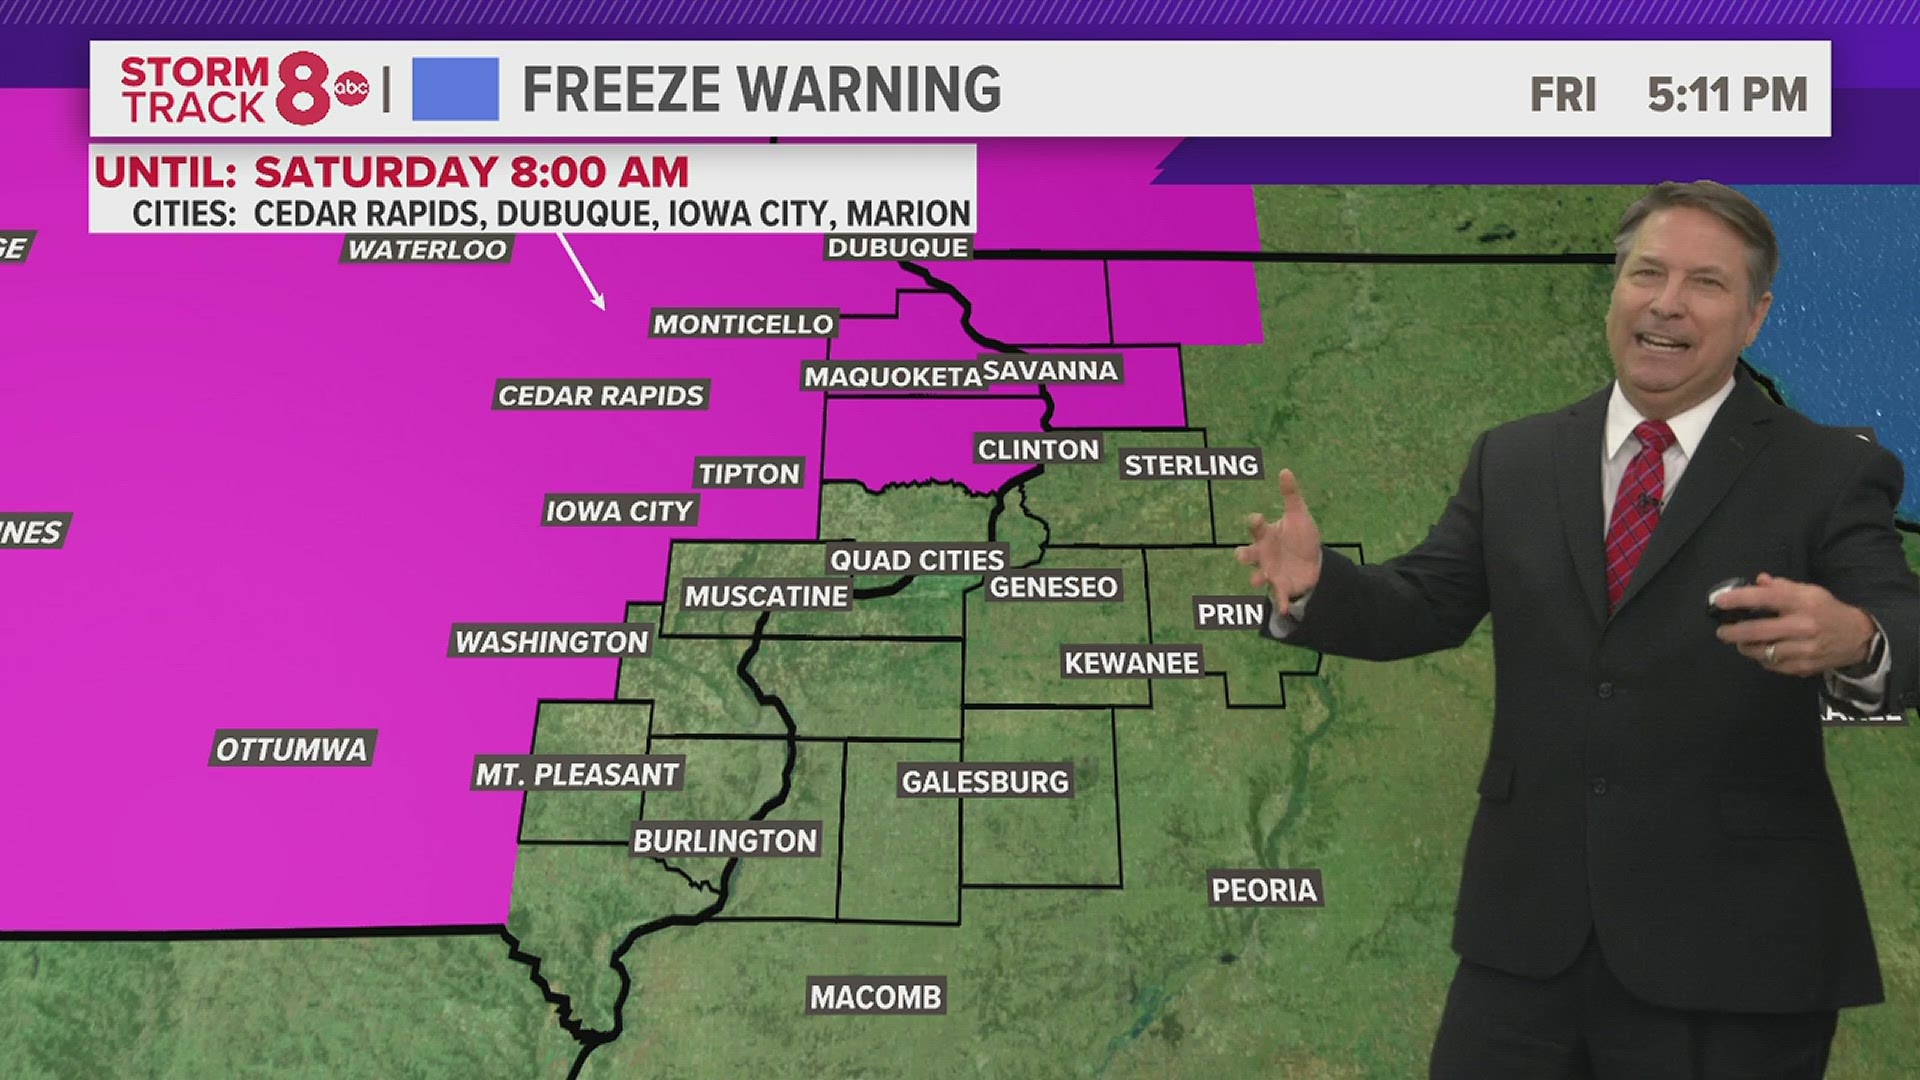 Freeze Warning overnight for parts of the area